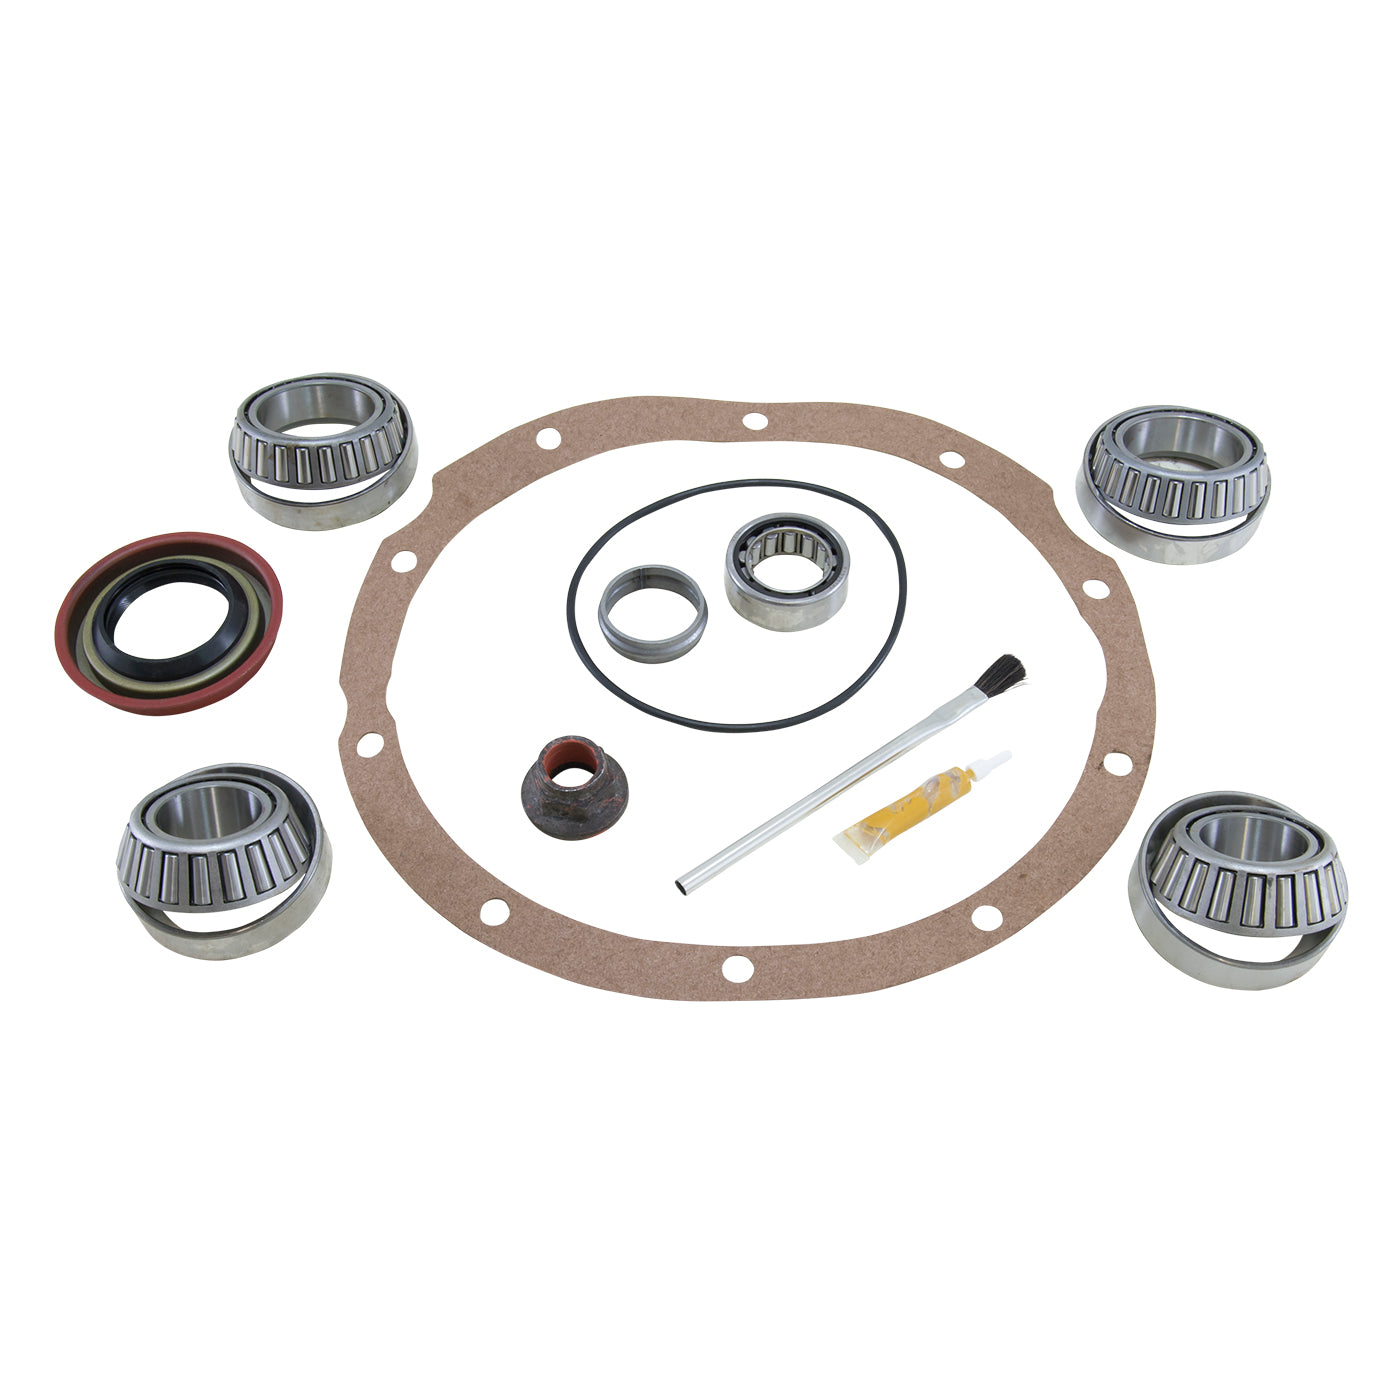 Yukon Gear Bearing install kit for Ford 9" differential, LM501310 bearings BK F9-B